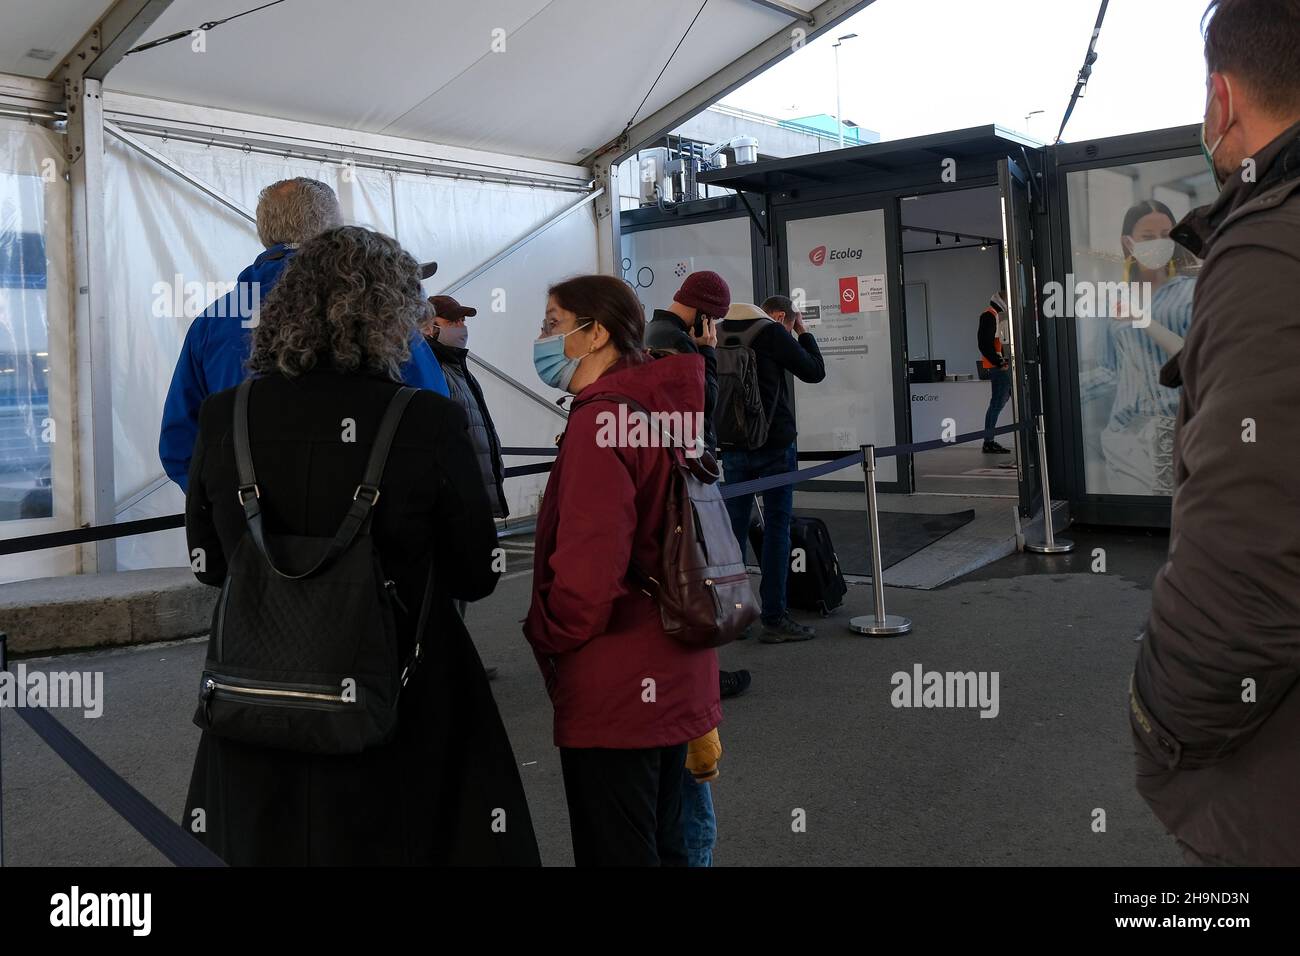 Brussels, Belgium. 7th Dec, 2021. People wait to receive test at a COVID-19 test center in Brussels, Belgium, Dec. 7, 2021. Hans Kluge, the WHO's regional director for Europe, on Tuesday urged governments and citizens in Europe to take immediate action to halt the spread of the COVID-19 pandemic by implementing five pandemic stabilizers to keep the mortality rate down. Credit: Zhang Cheng/Xinhua/Alamy Live News Stock Photo